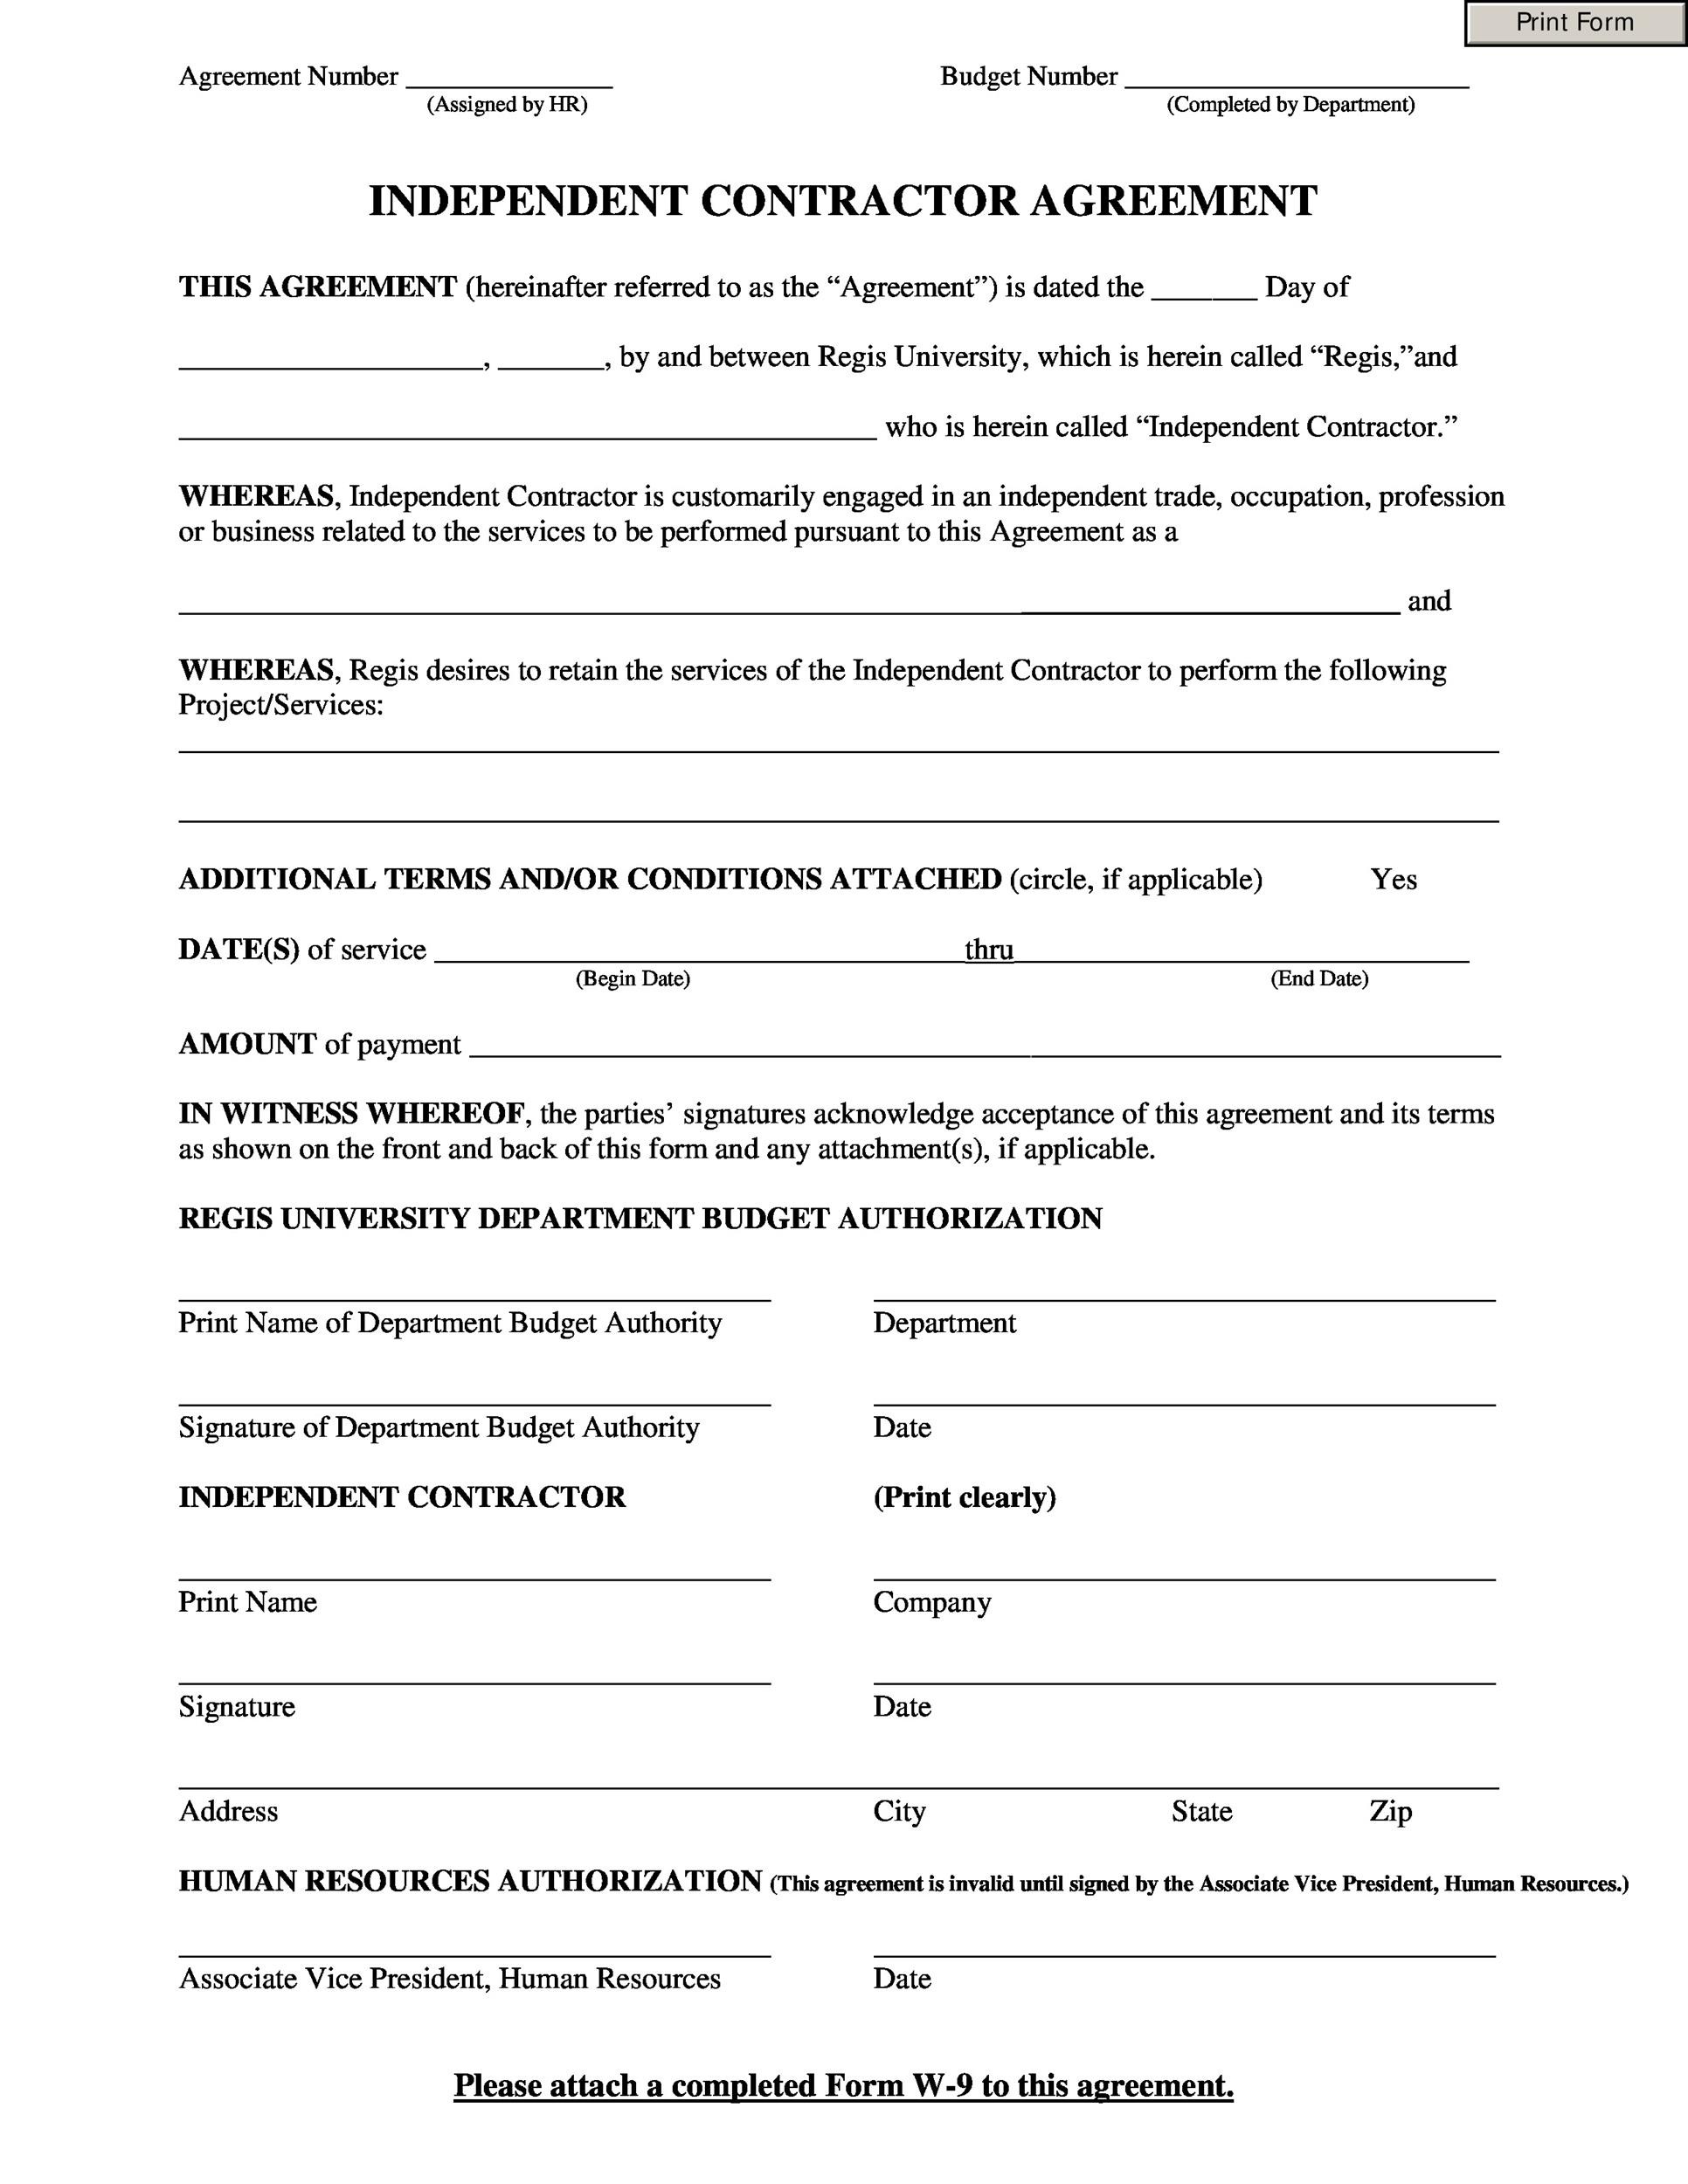 Free independent contractor agreement 45